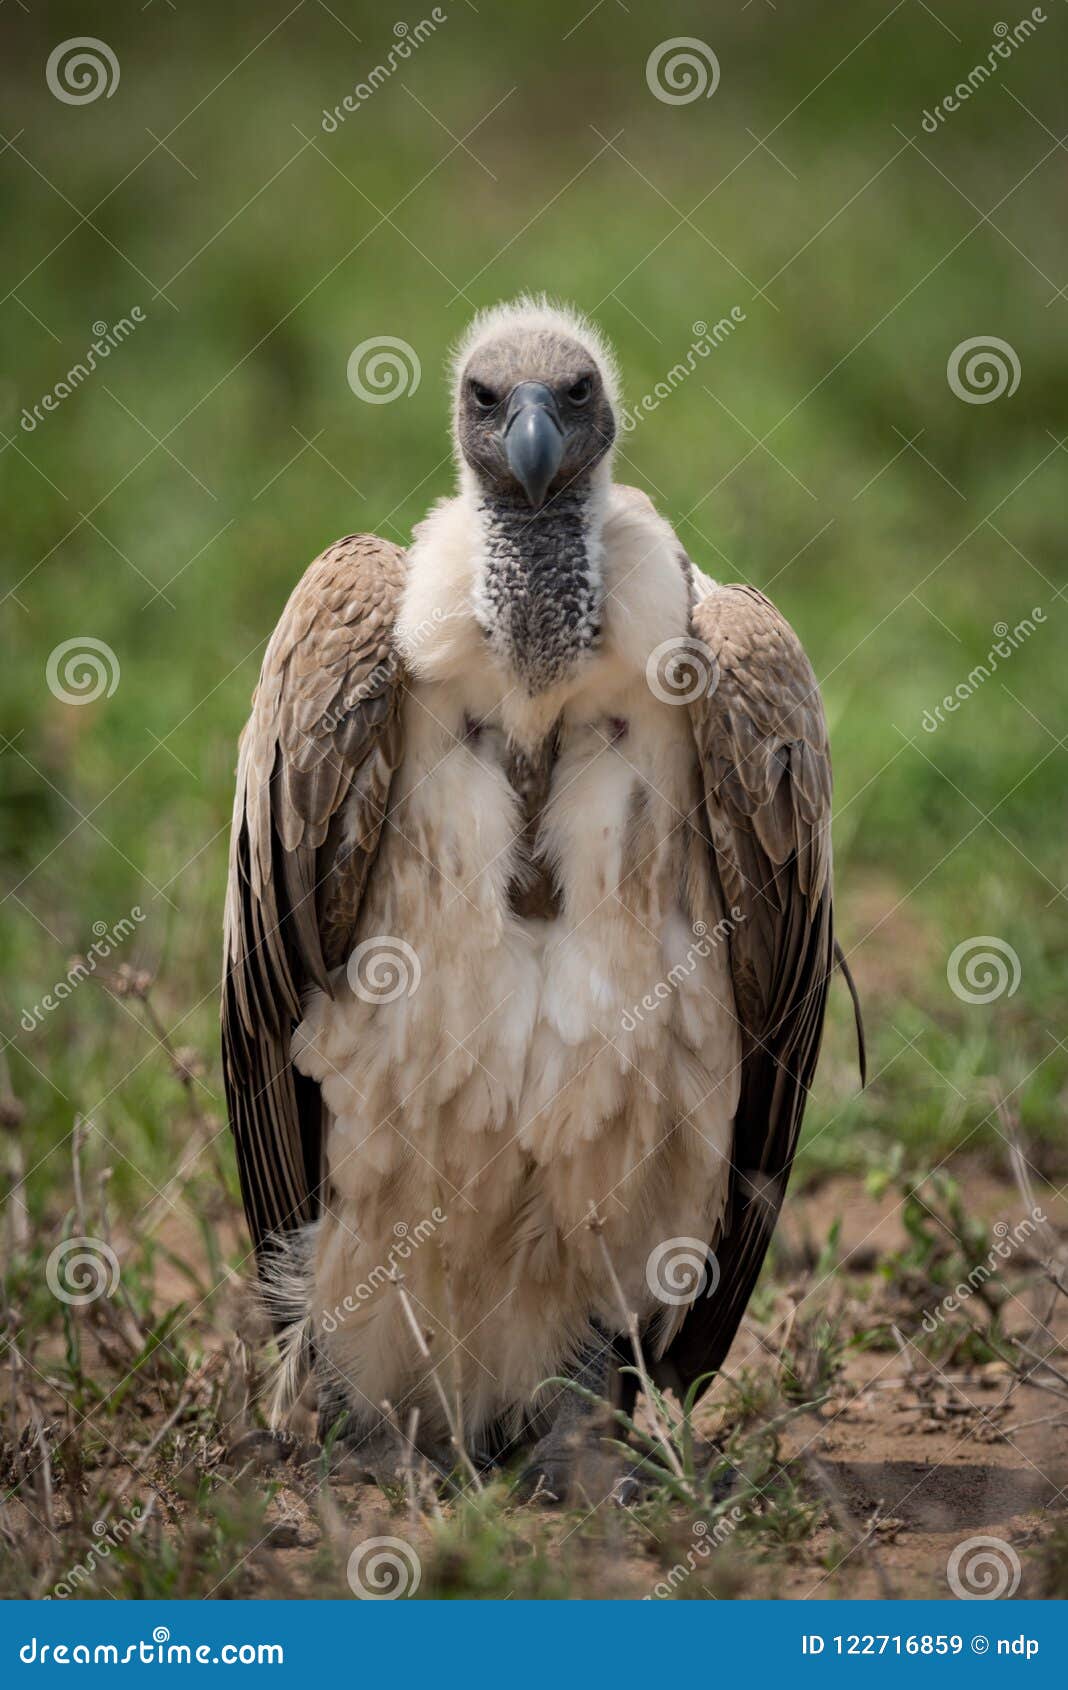 White-backed Vulture Standing on Grassland Facing Camera Stock Image ...